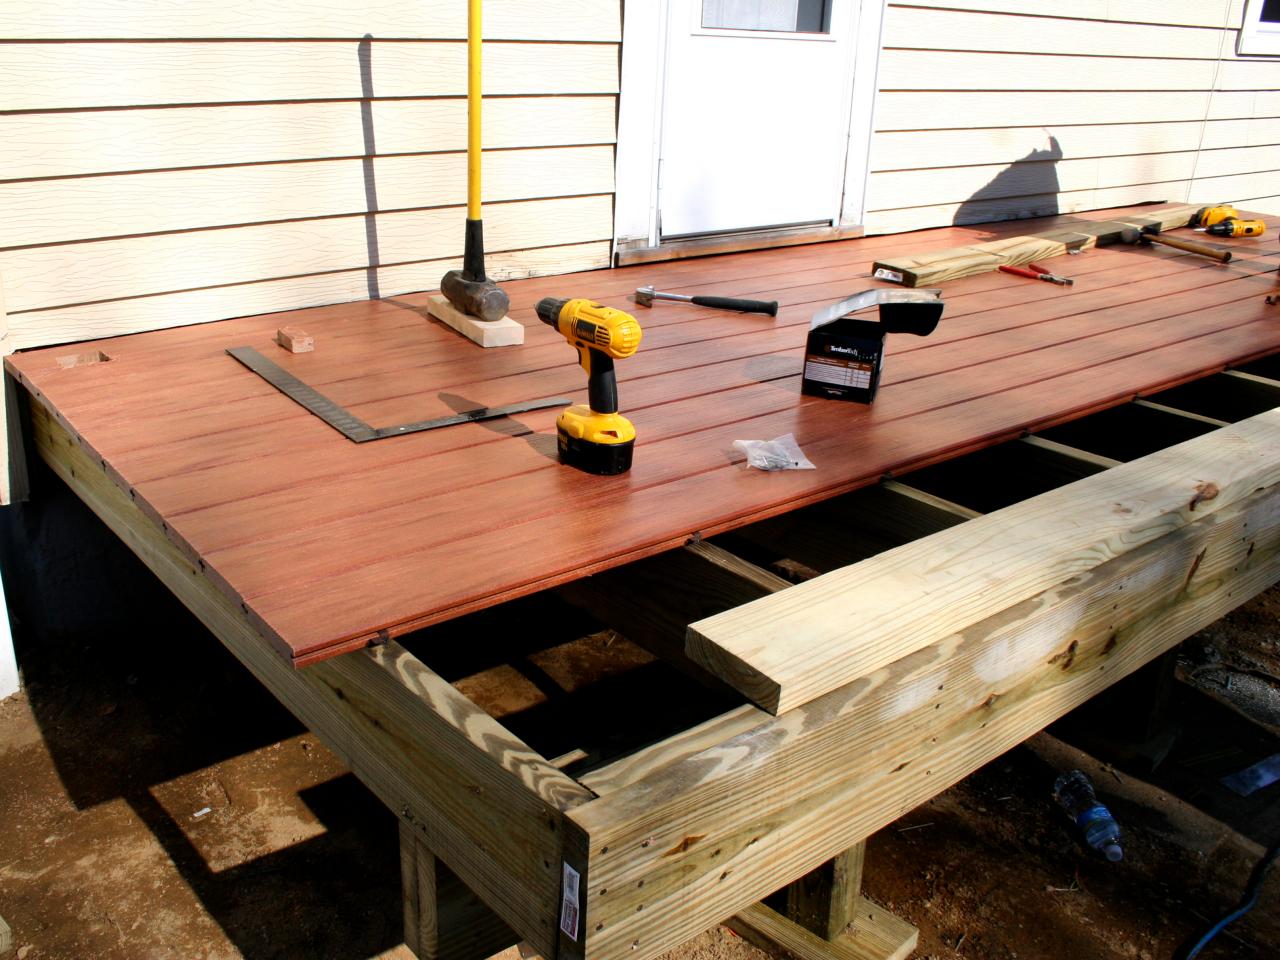 How to Build a Simple Deck | HGTV